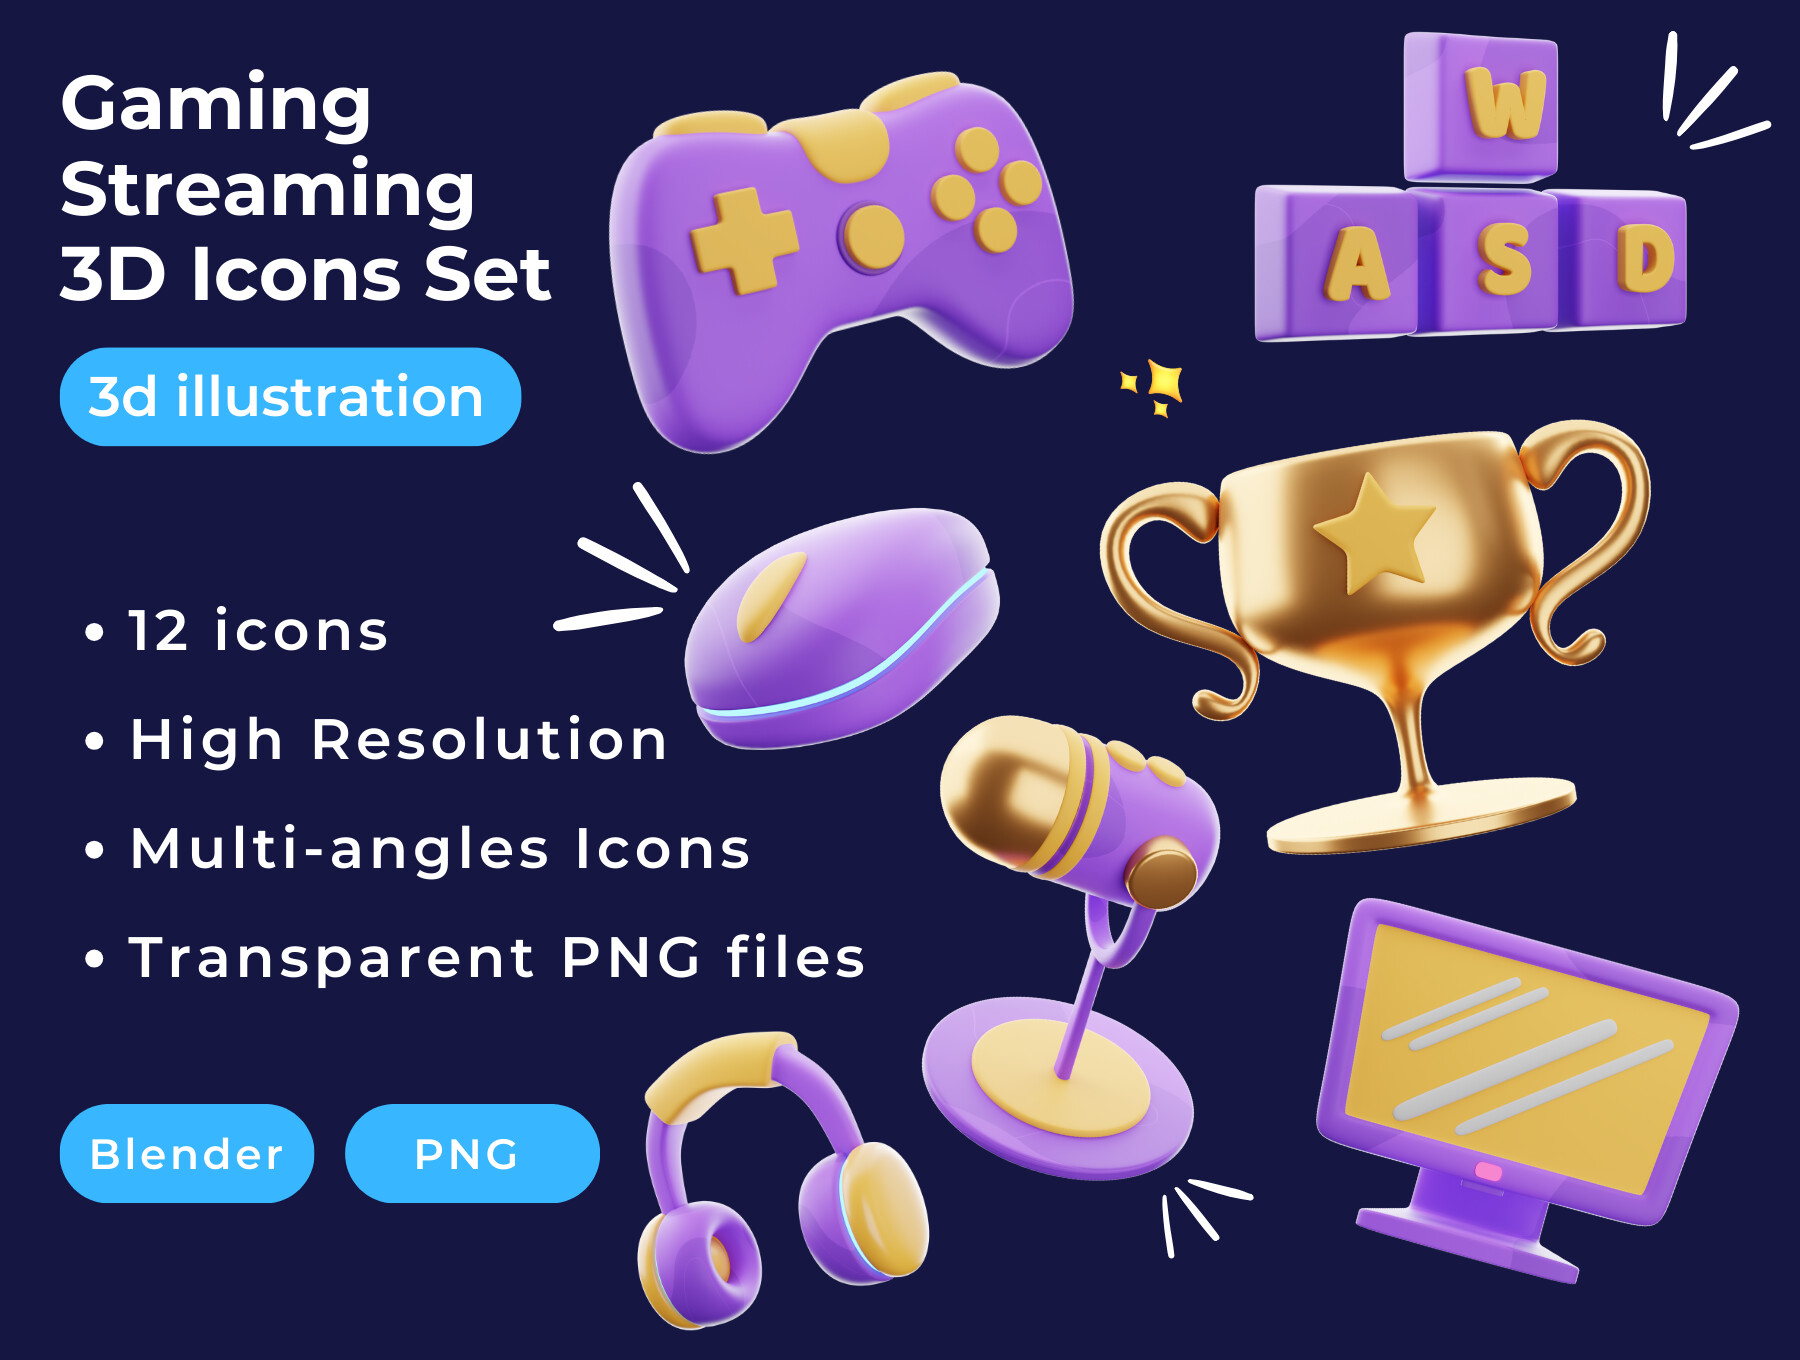 ArtStation - Gaming Streaming - 3d stylized icons perfect for apps